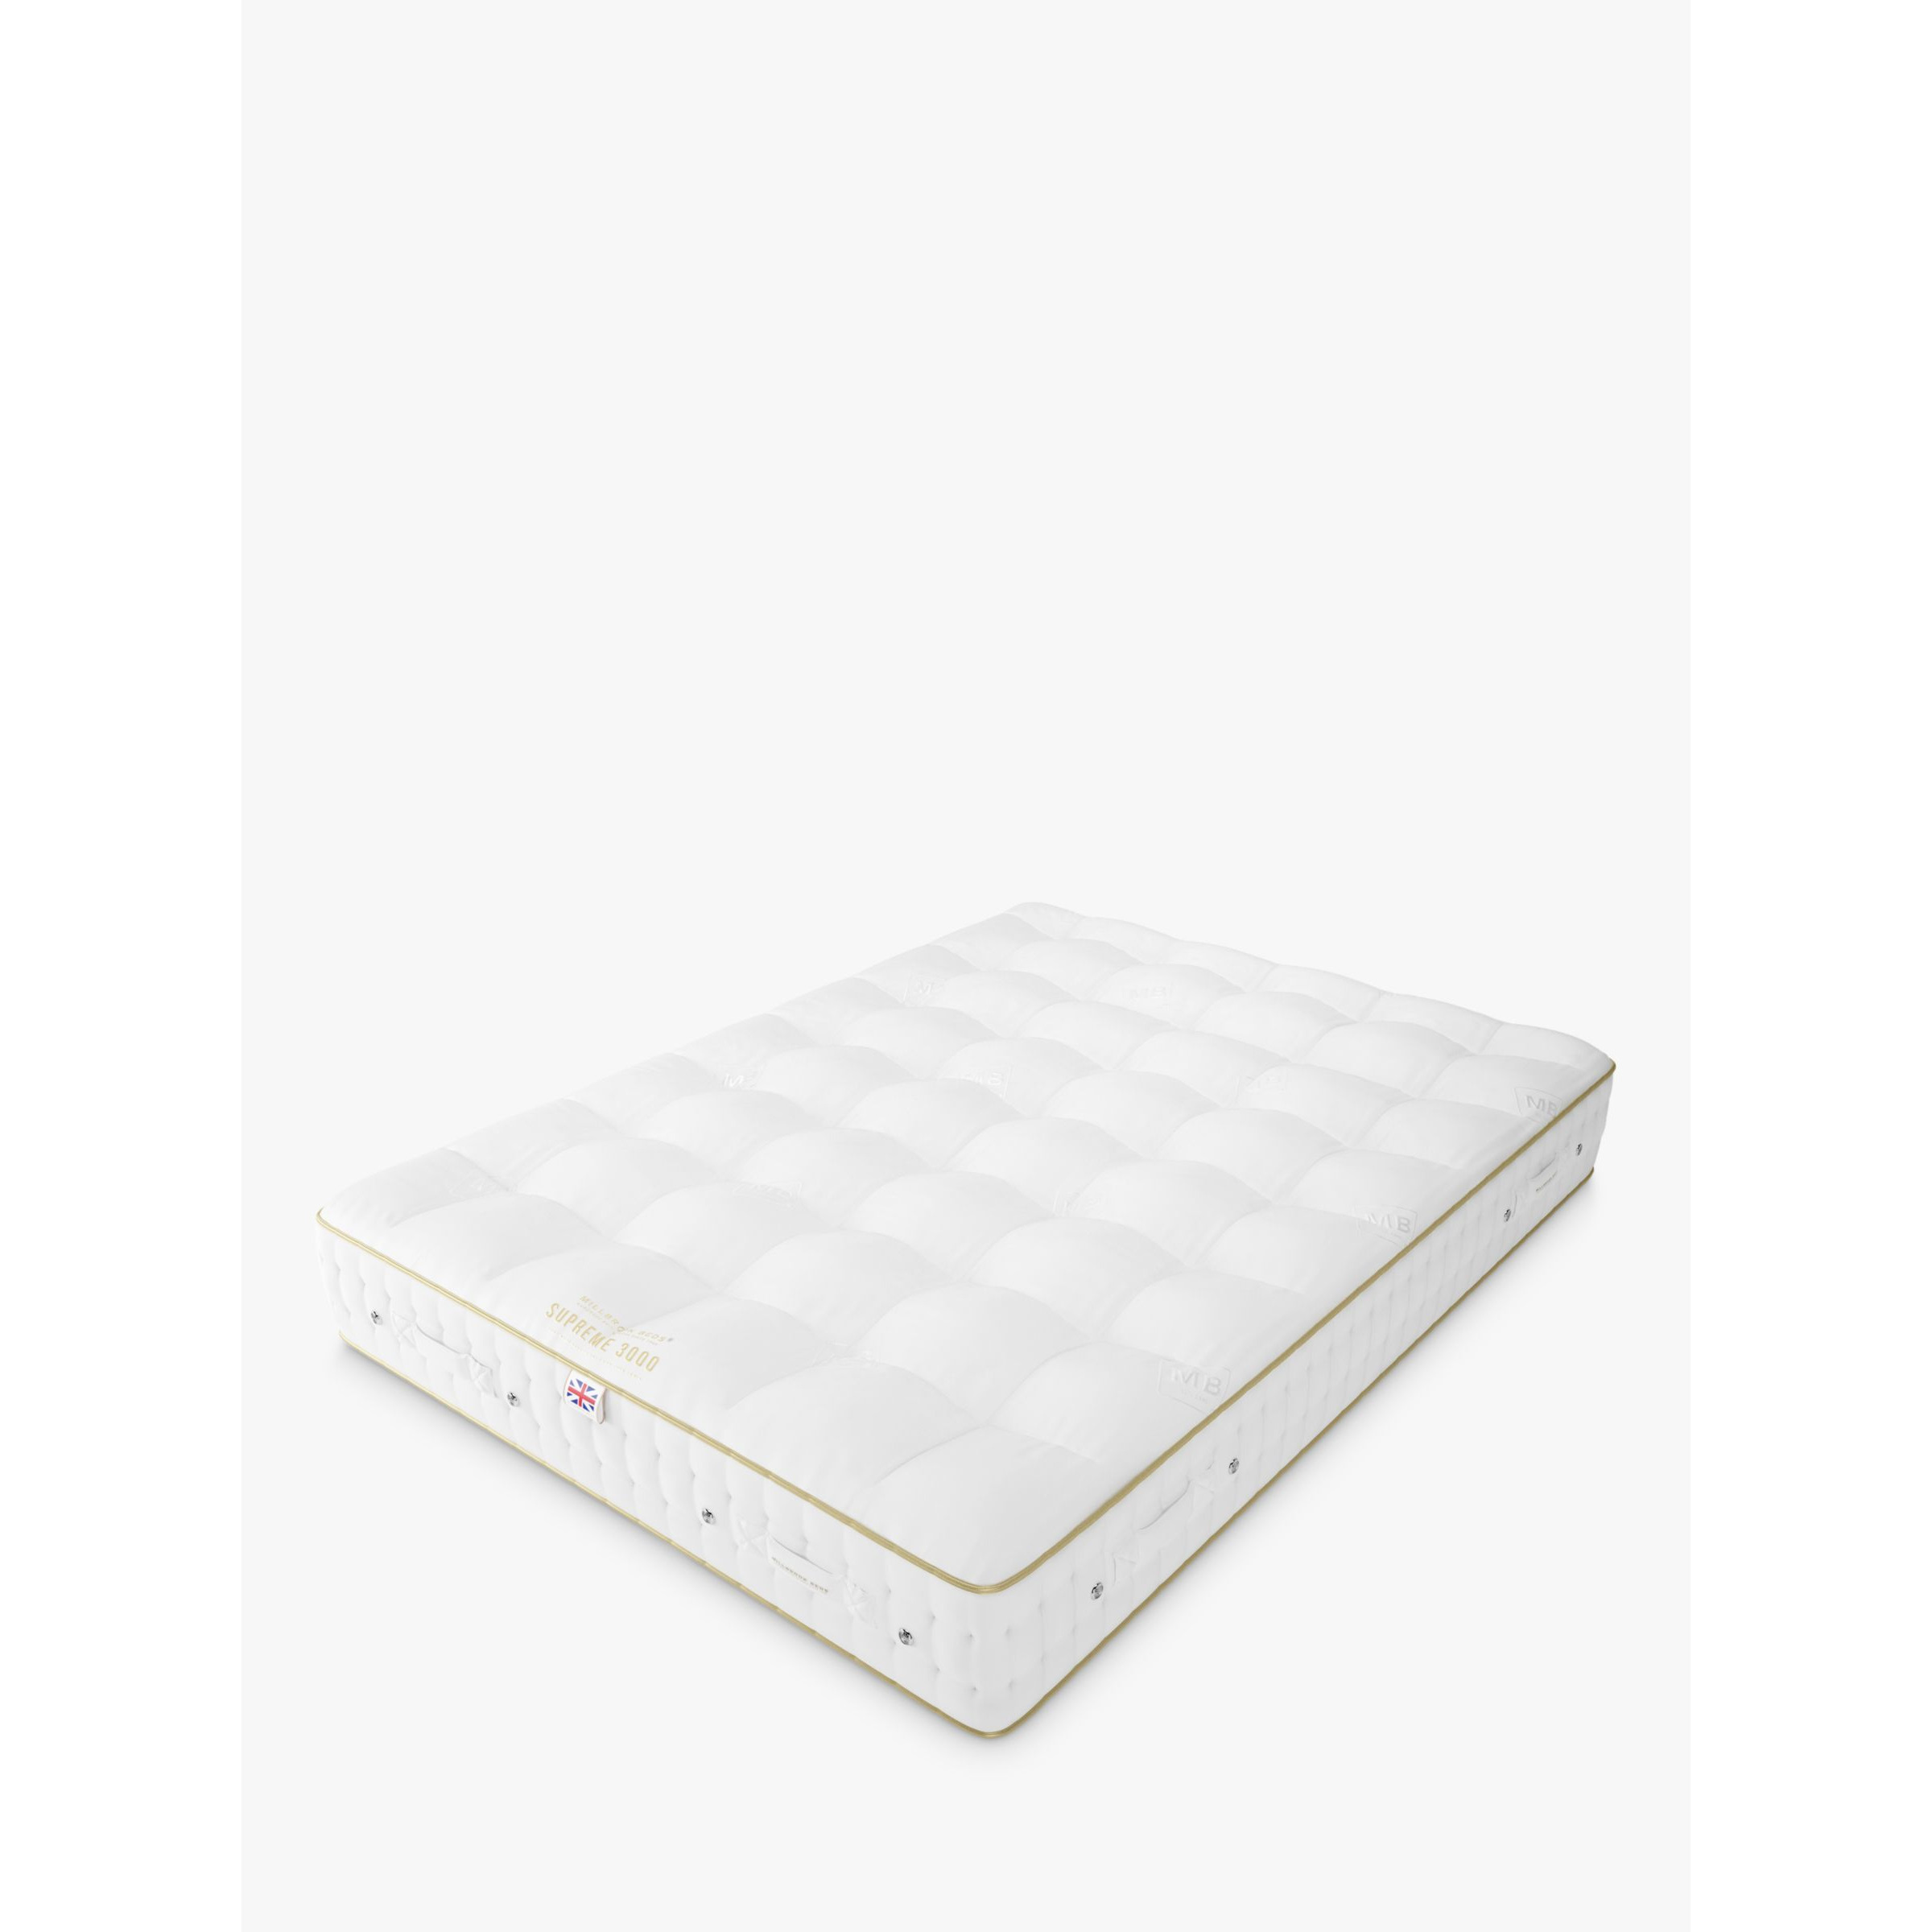 Millbrook Beds Supreme Collection 3000 Mattress, Firm Tension, Small Double - image 1